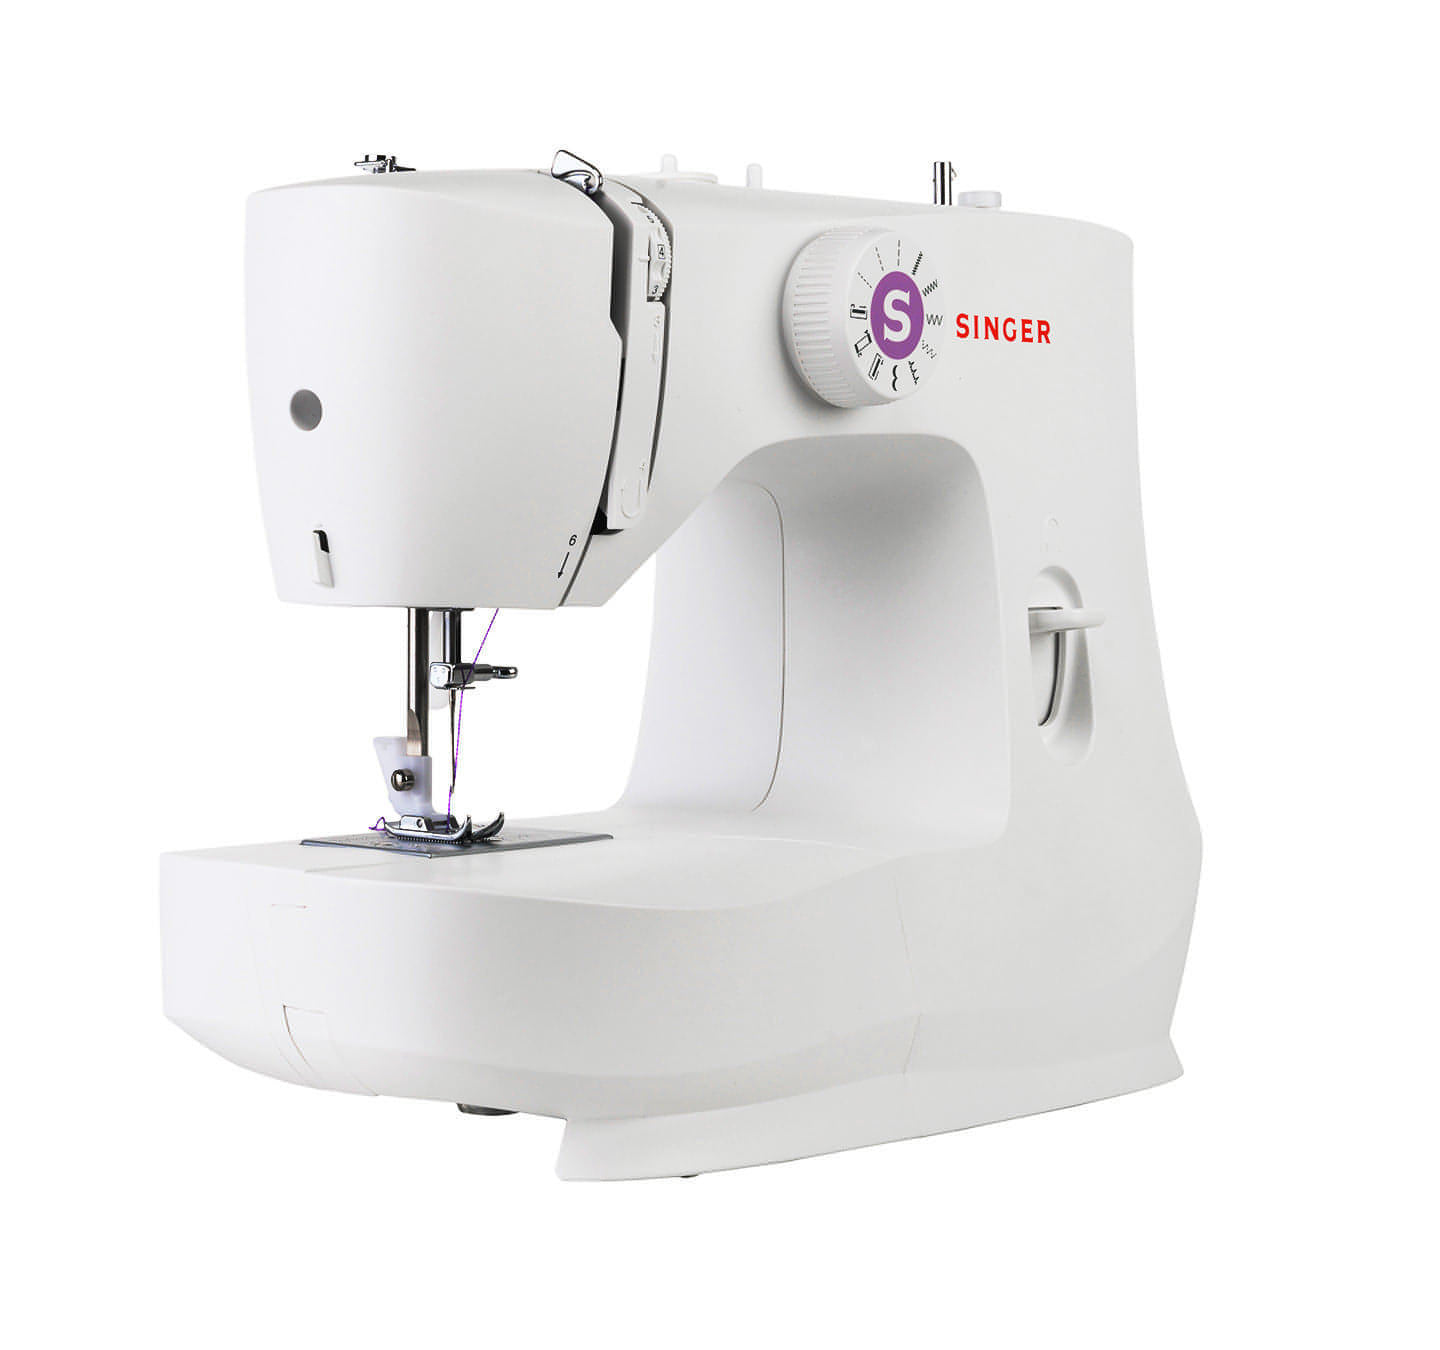 Singer M1605: UAE's Lightweight and User-Friendly Domestic Sewing Machine –  NEW AL AFRAH